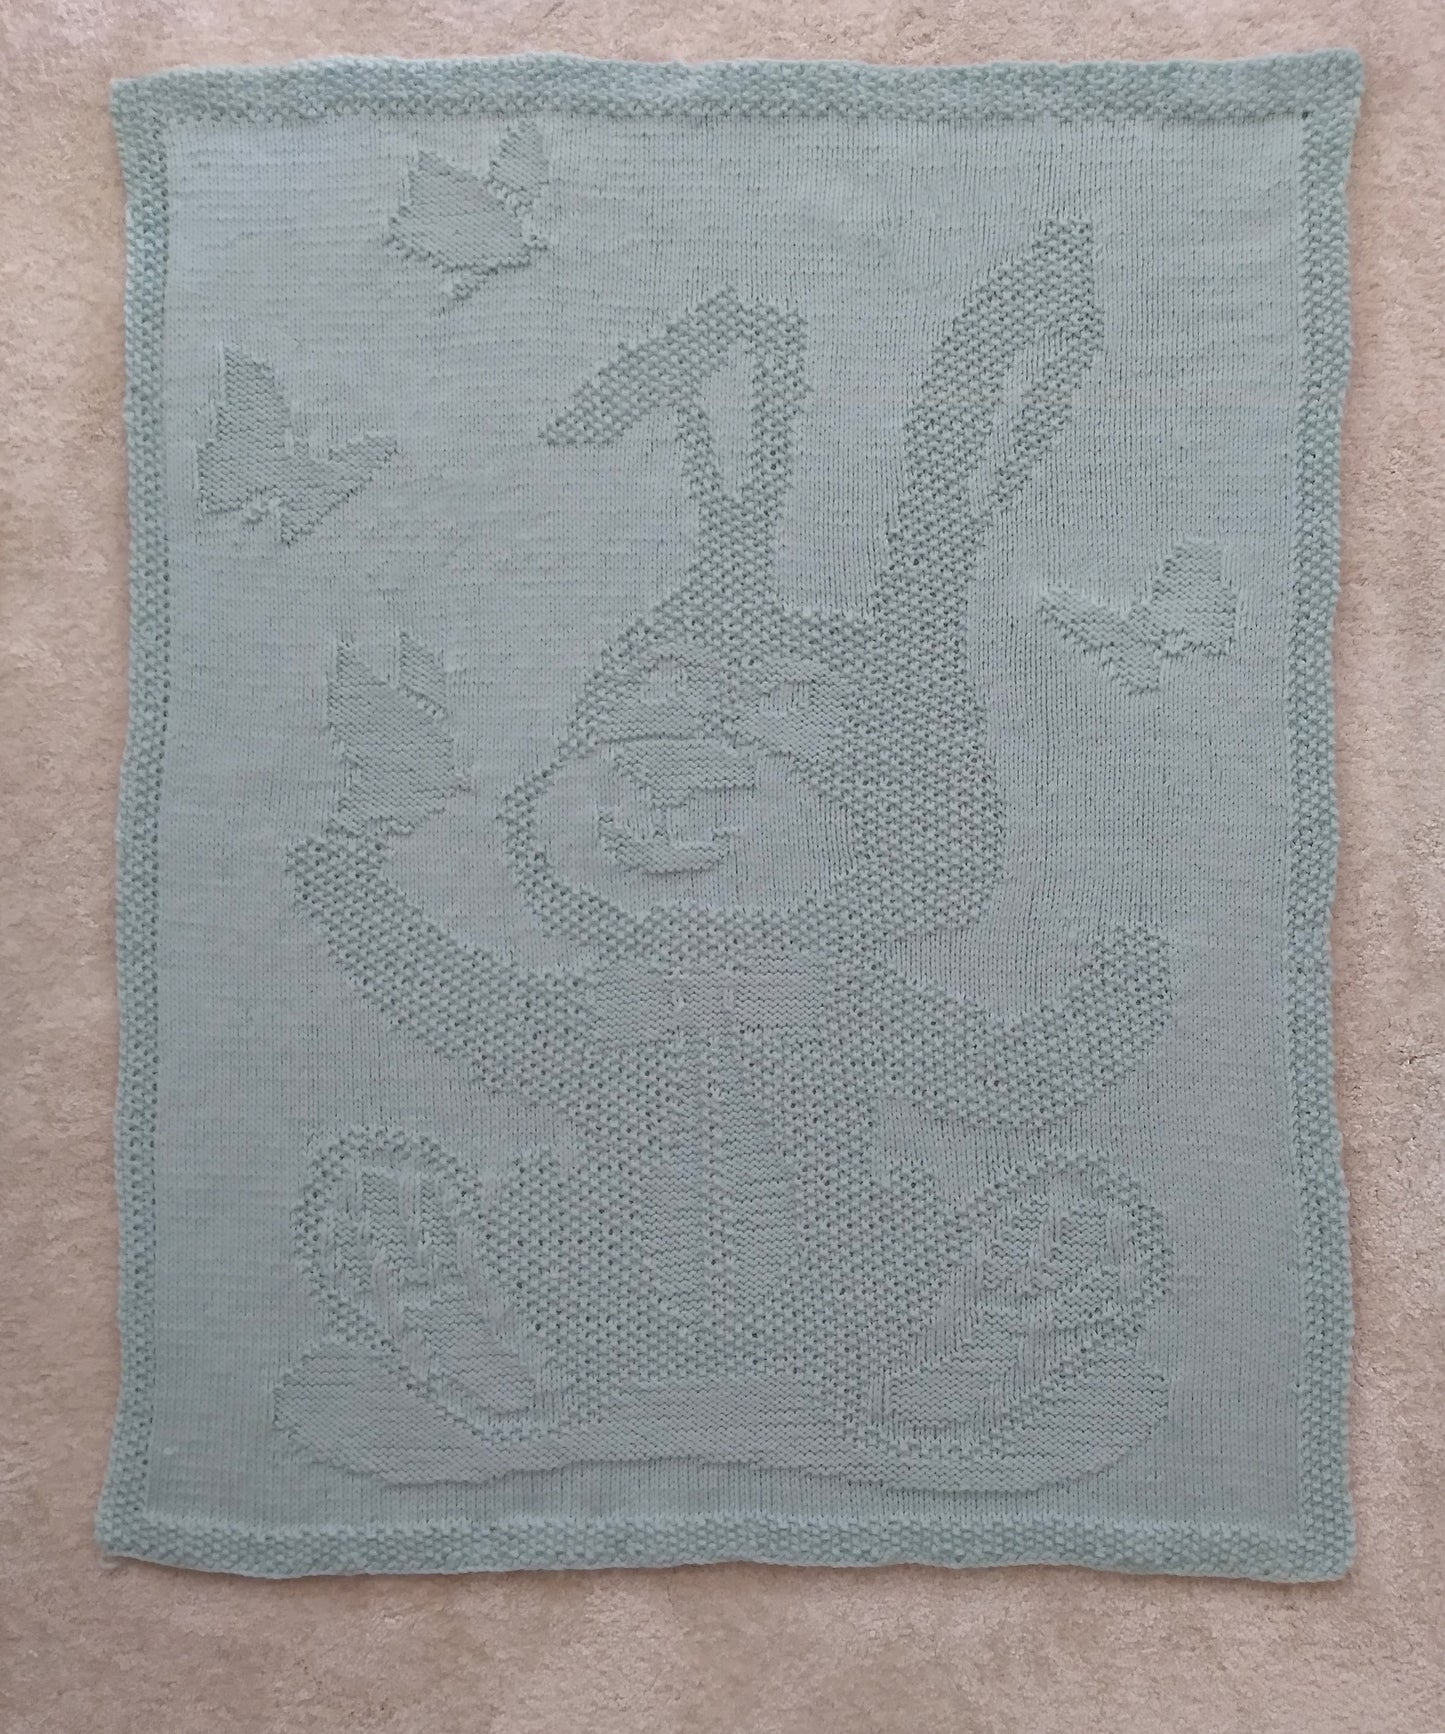 Bunny and Butterflies Baby Blanket Knitting Pattern